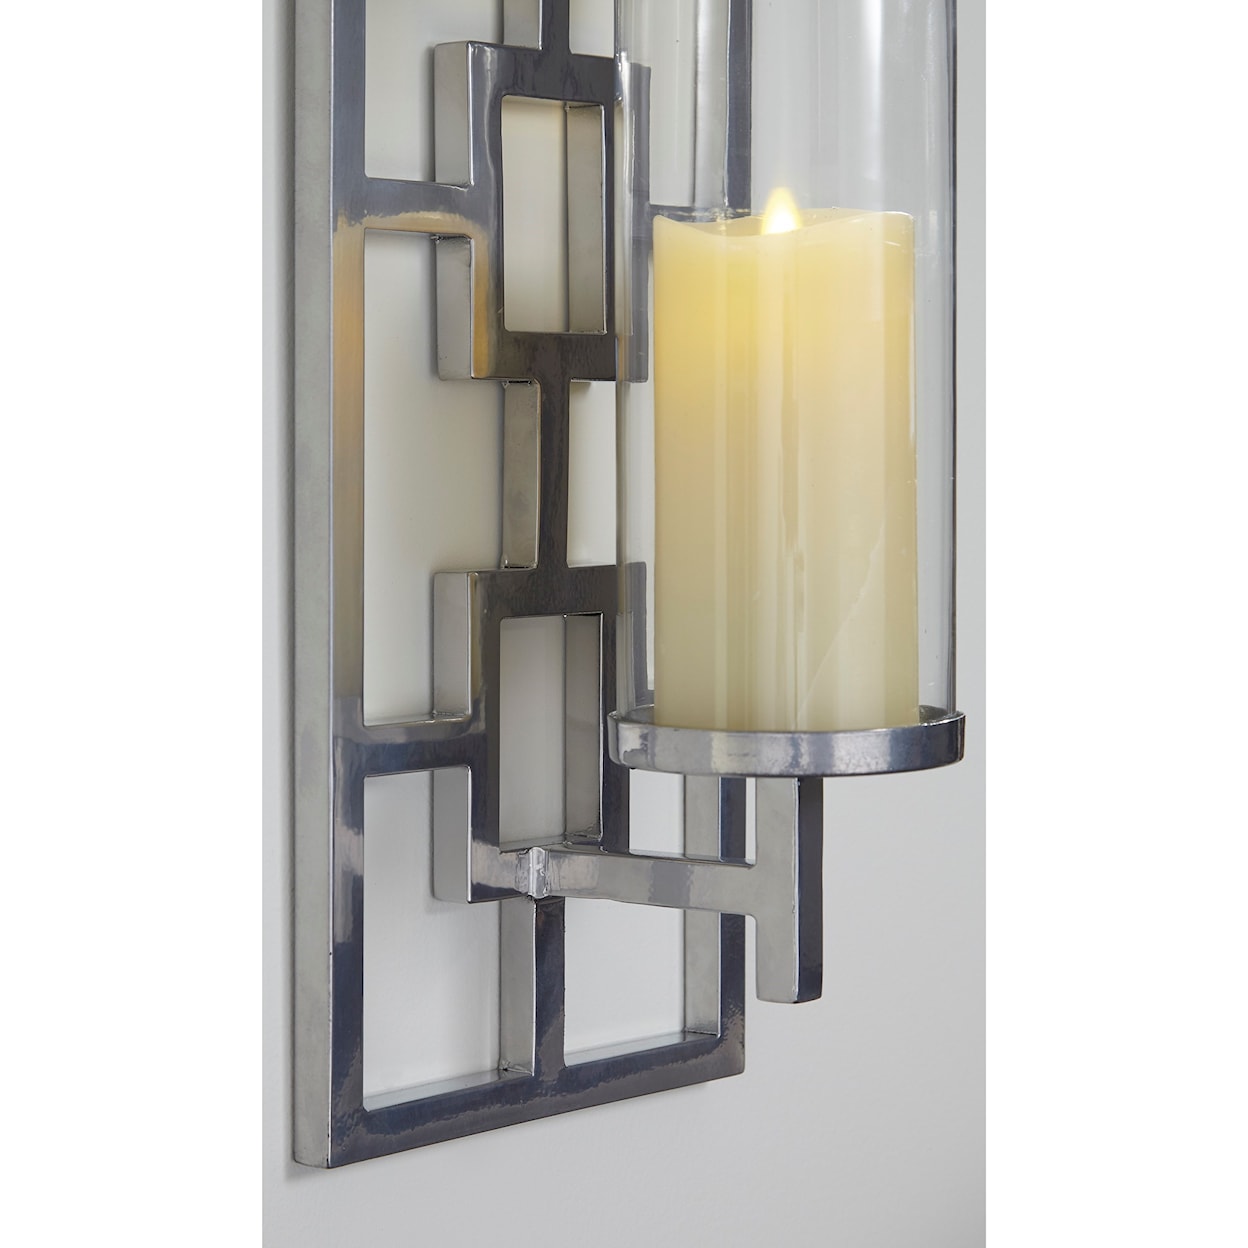 Signature Design Wall Art Brede Silver Finish Wall Sconce